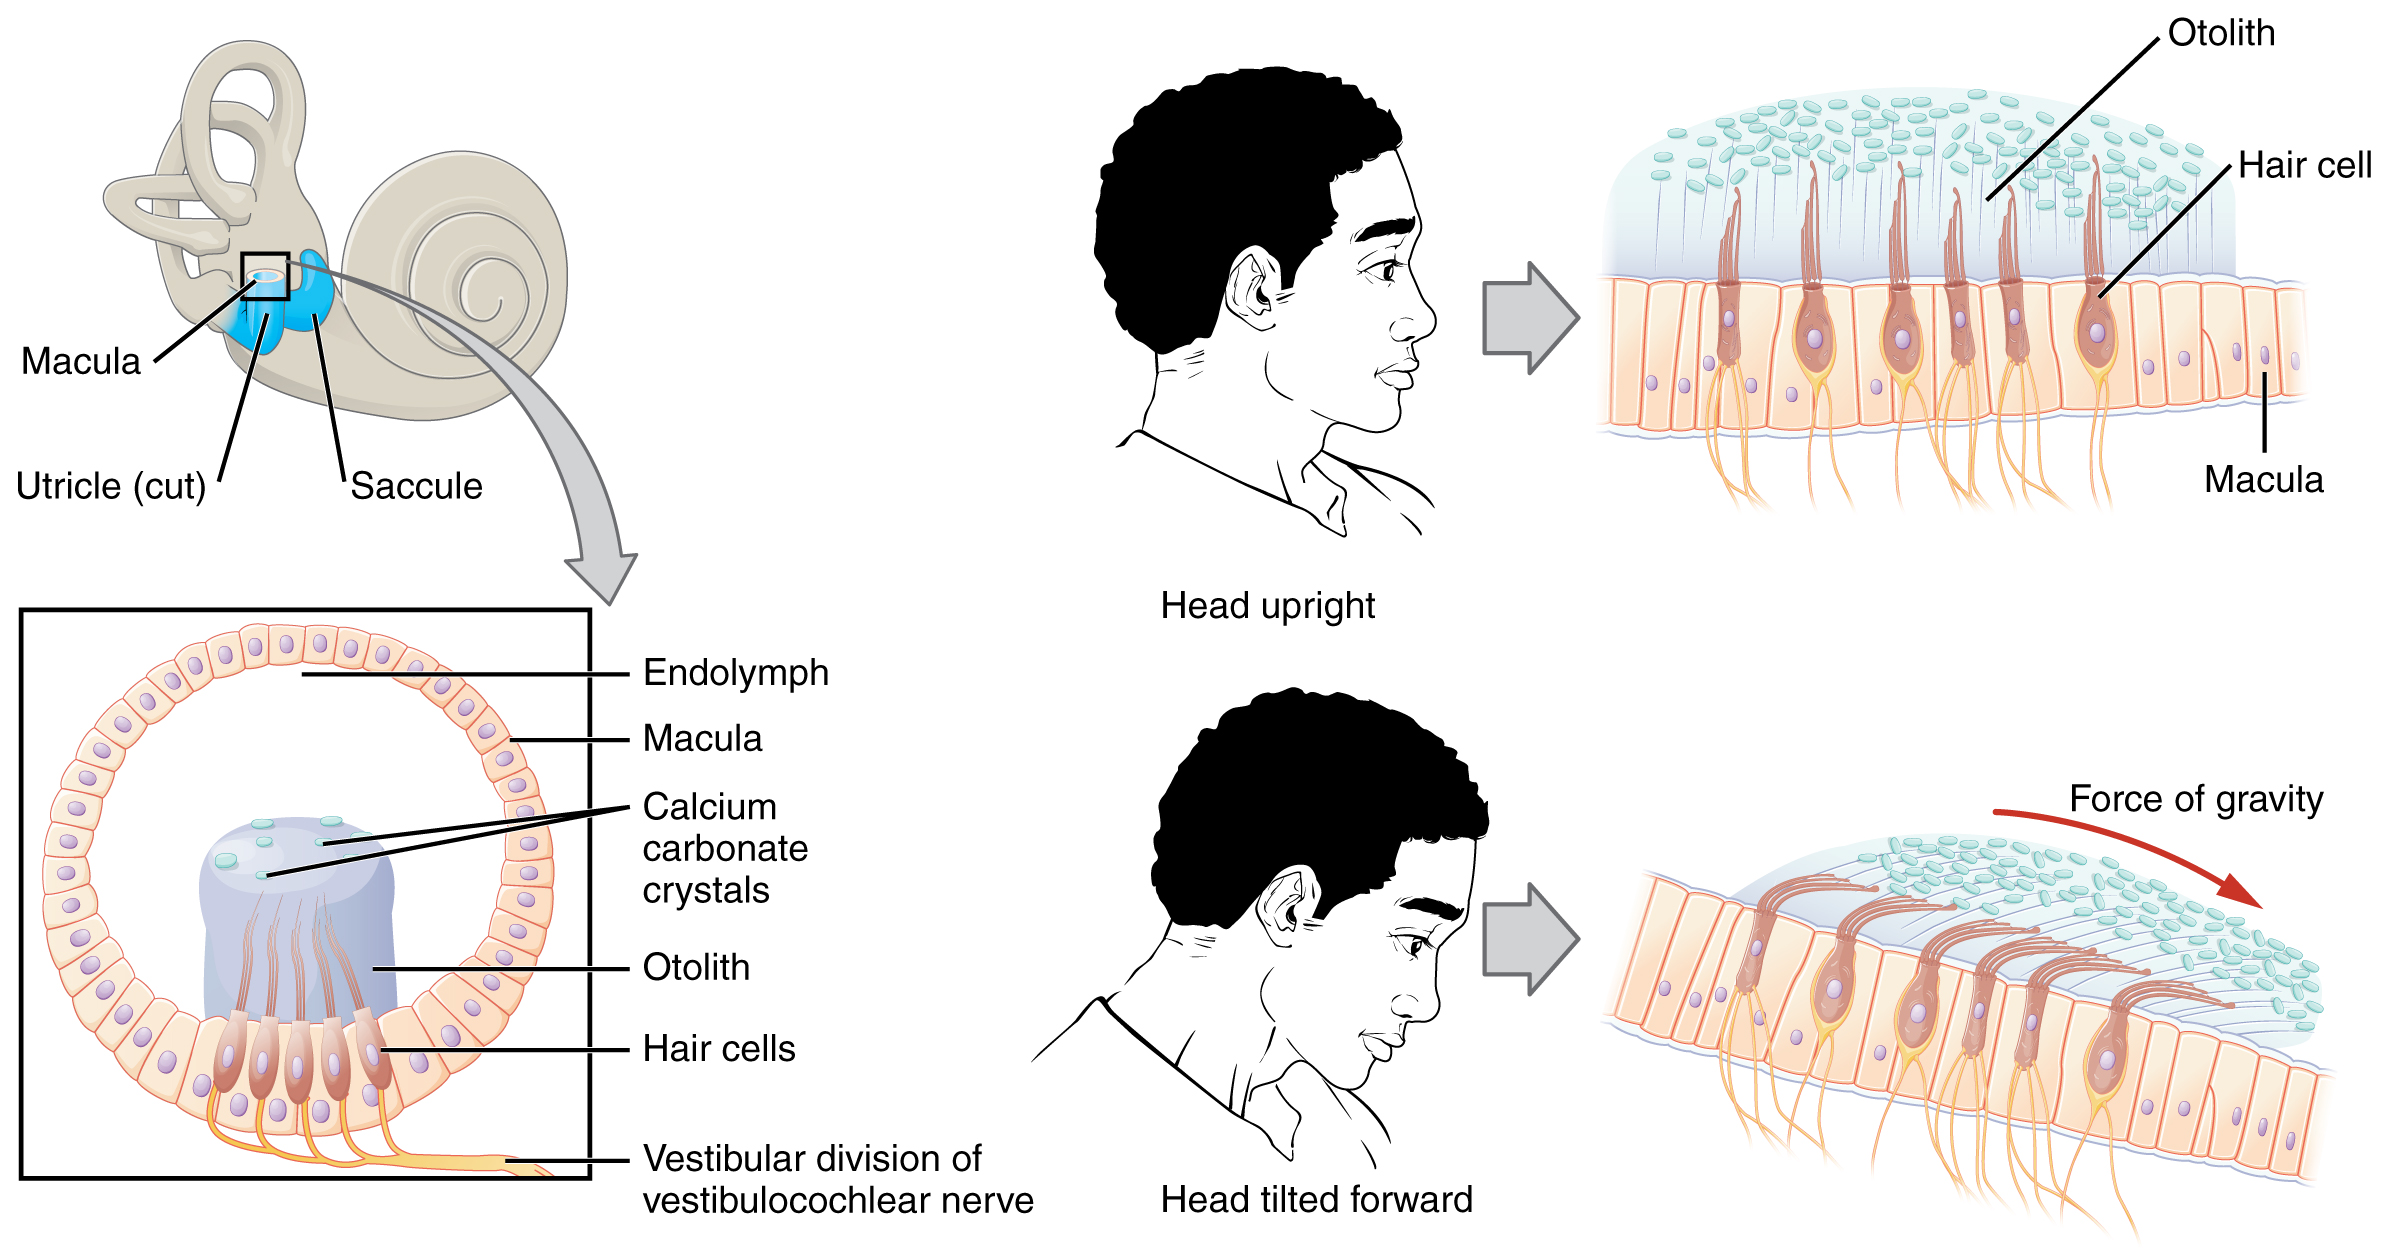 This diagram shows how the macula orients itself to allow for equilibrium. The top left panel shows the inner ear. The bottom left panel shows the cellular structure of the macula. In the top right panel, a person’s head is shown in the side view along with the orientation of the macula. In the bottom right panel, a person’s head is shown with the head tilted forward and depicts the orientation of the macula to account for the tilt.